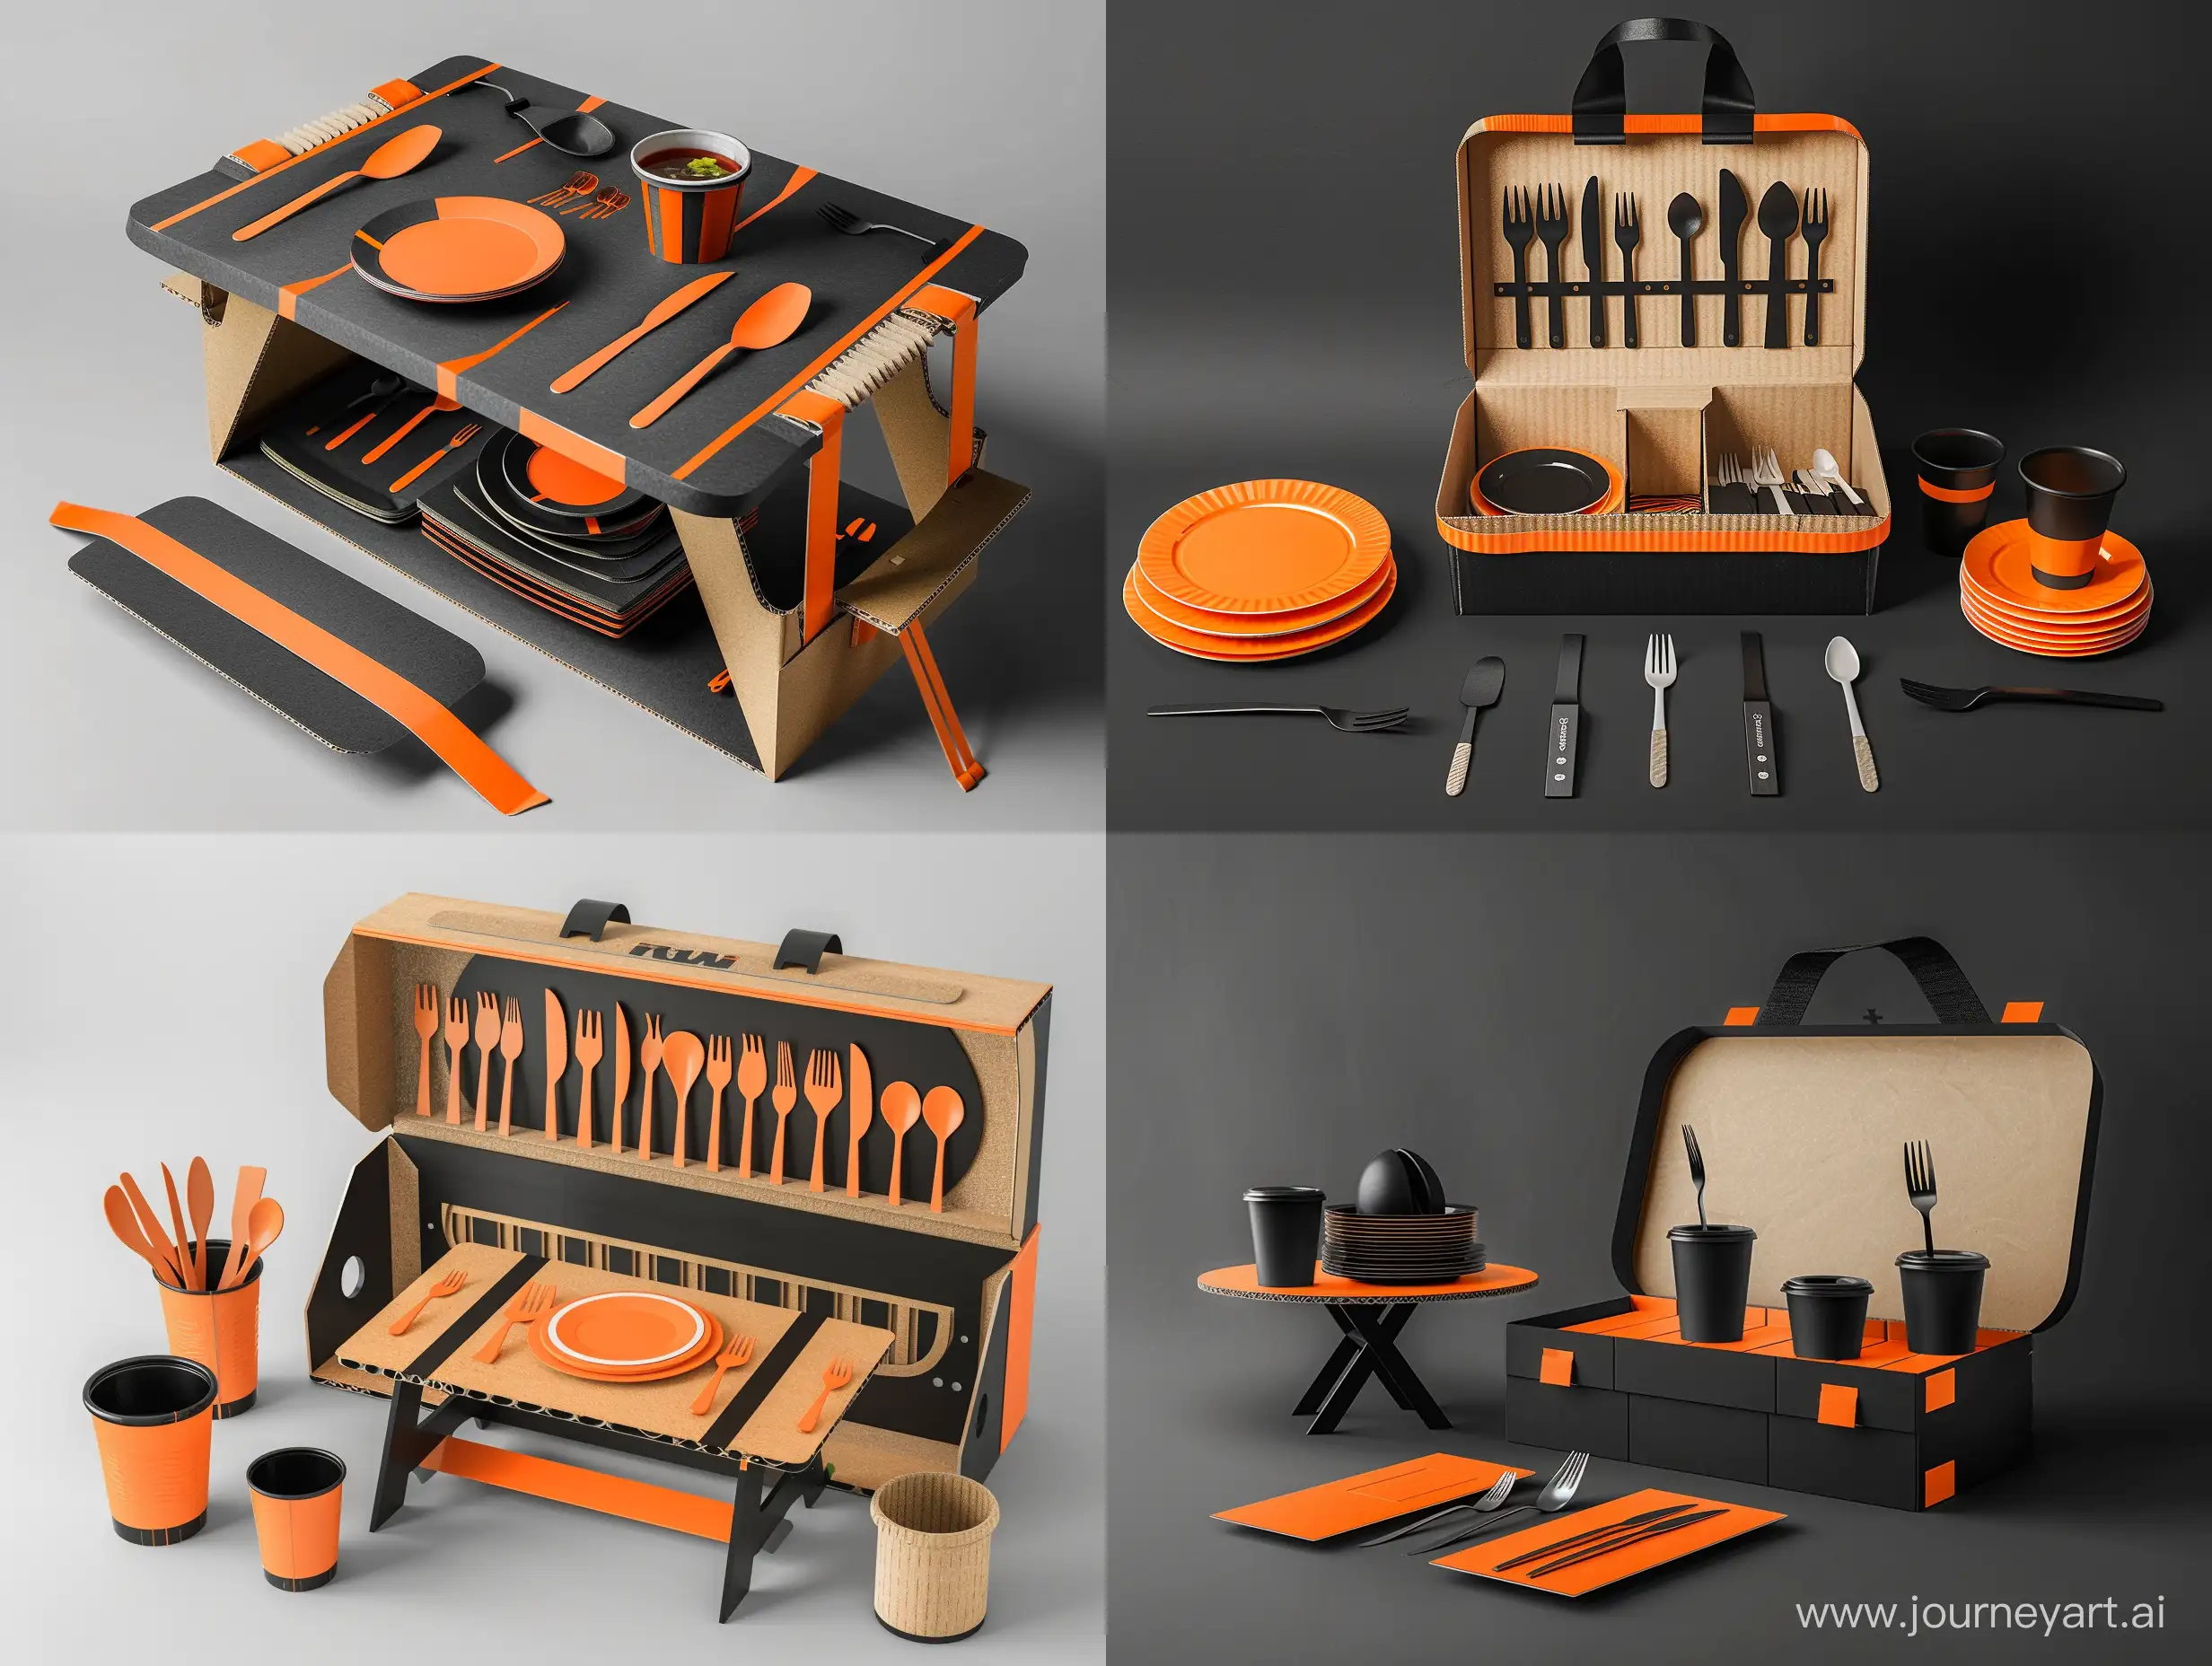 Cardboard packaging, Kraft, orange and black color, creative packaging, photo realism, commercial photo retouching, packaging for plates, forks, spoons, cups, elegant design, concept, trendy design, eco packaging, transformable packaging into a picnic table, promotional photo retouching